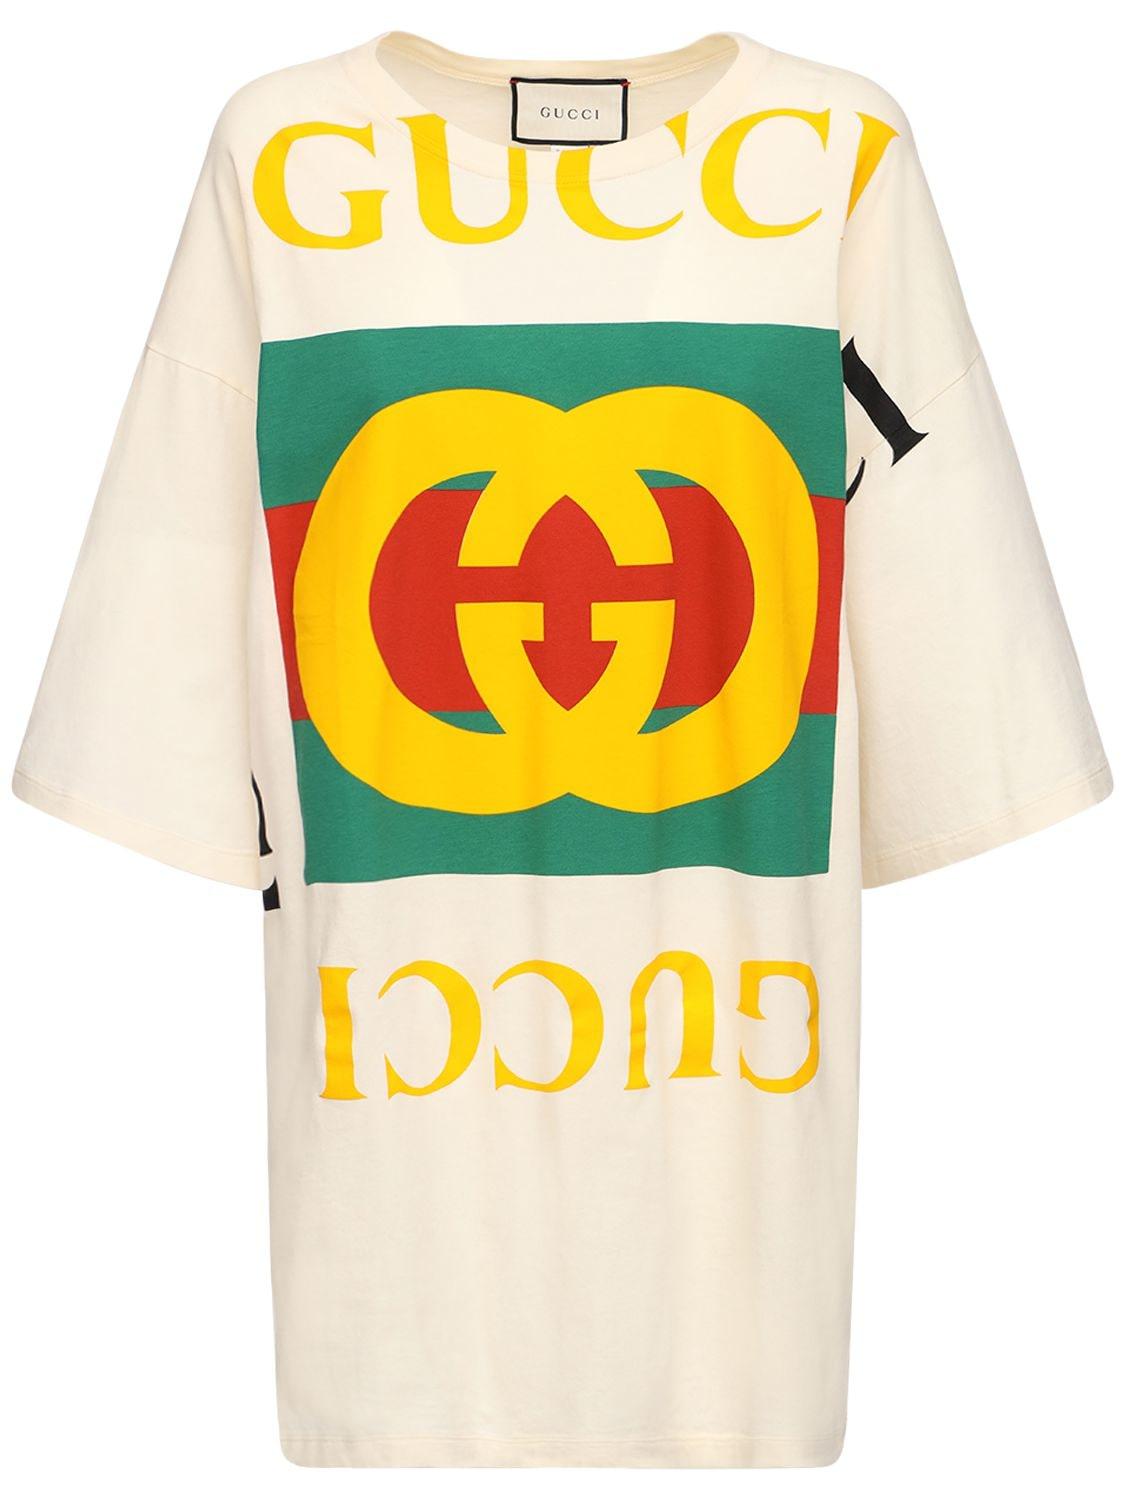 Gucci Oversize Printed Cotton T-shirt ...